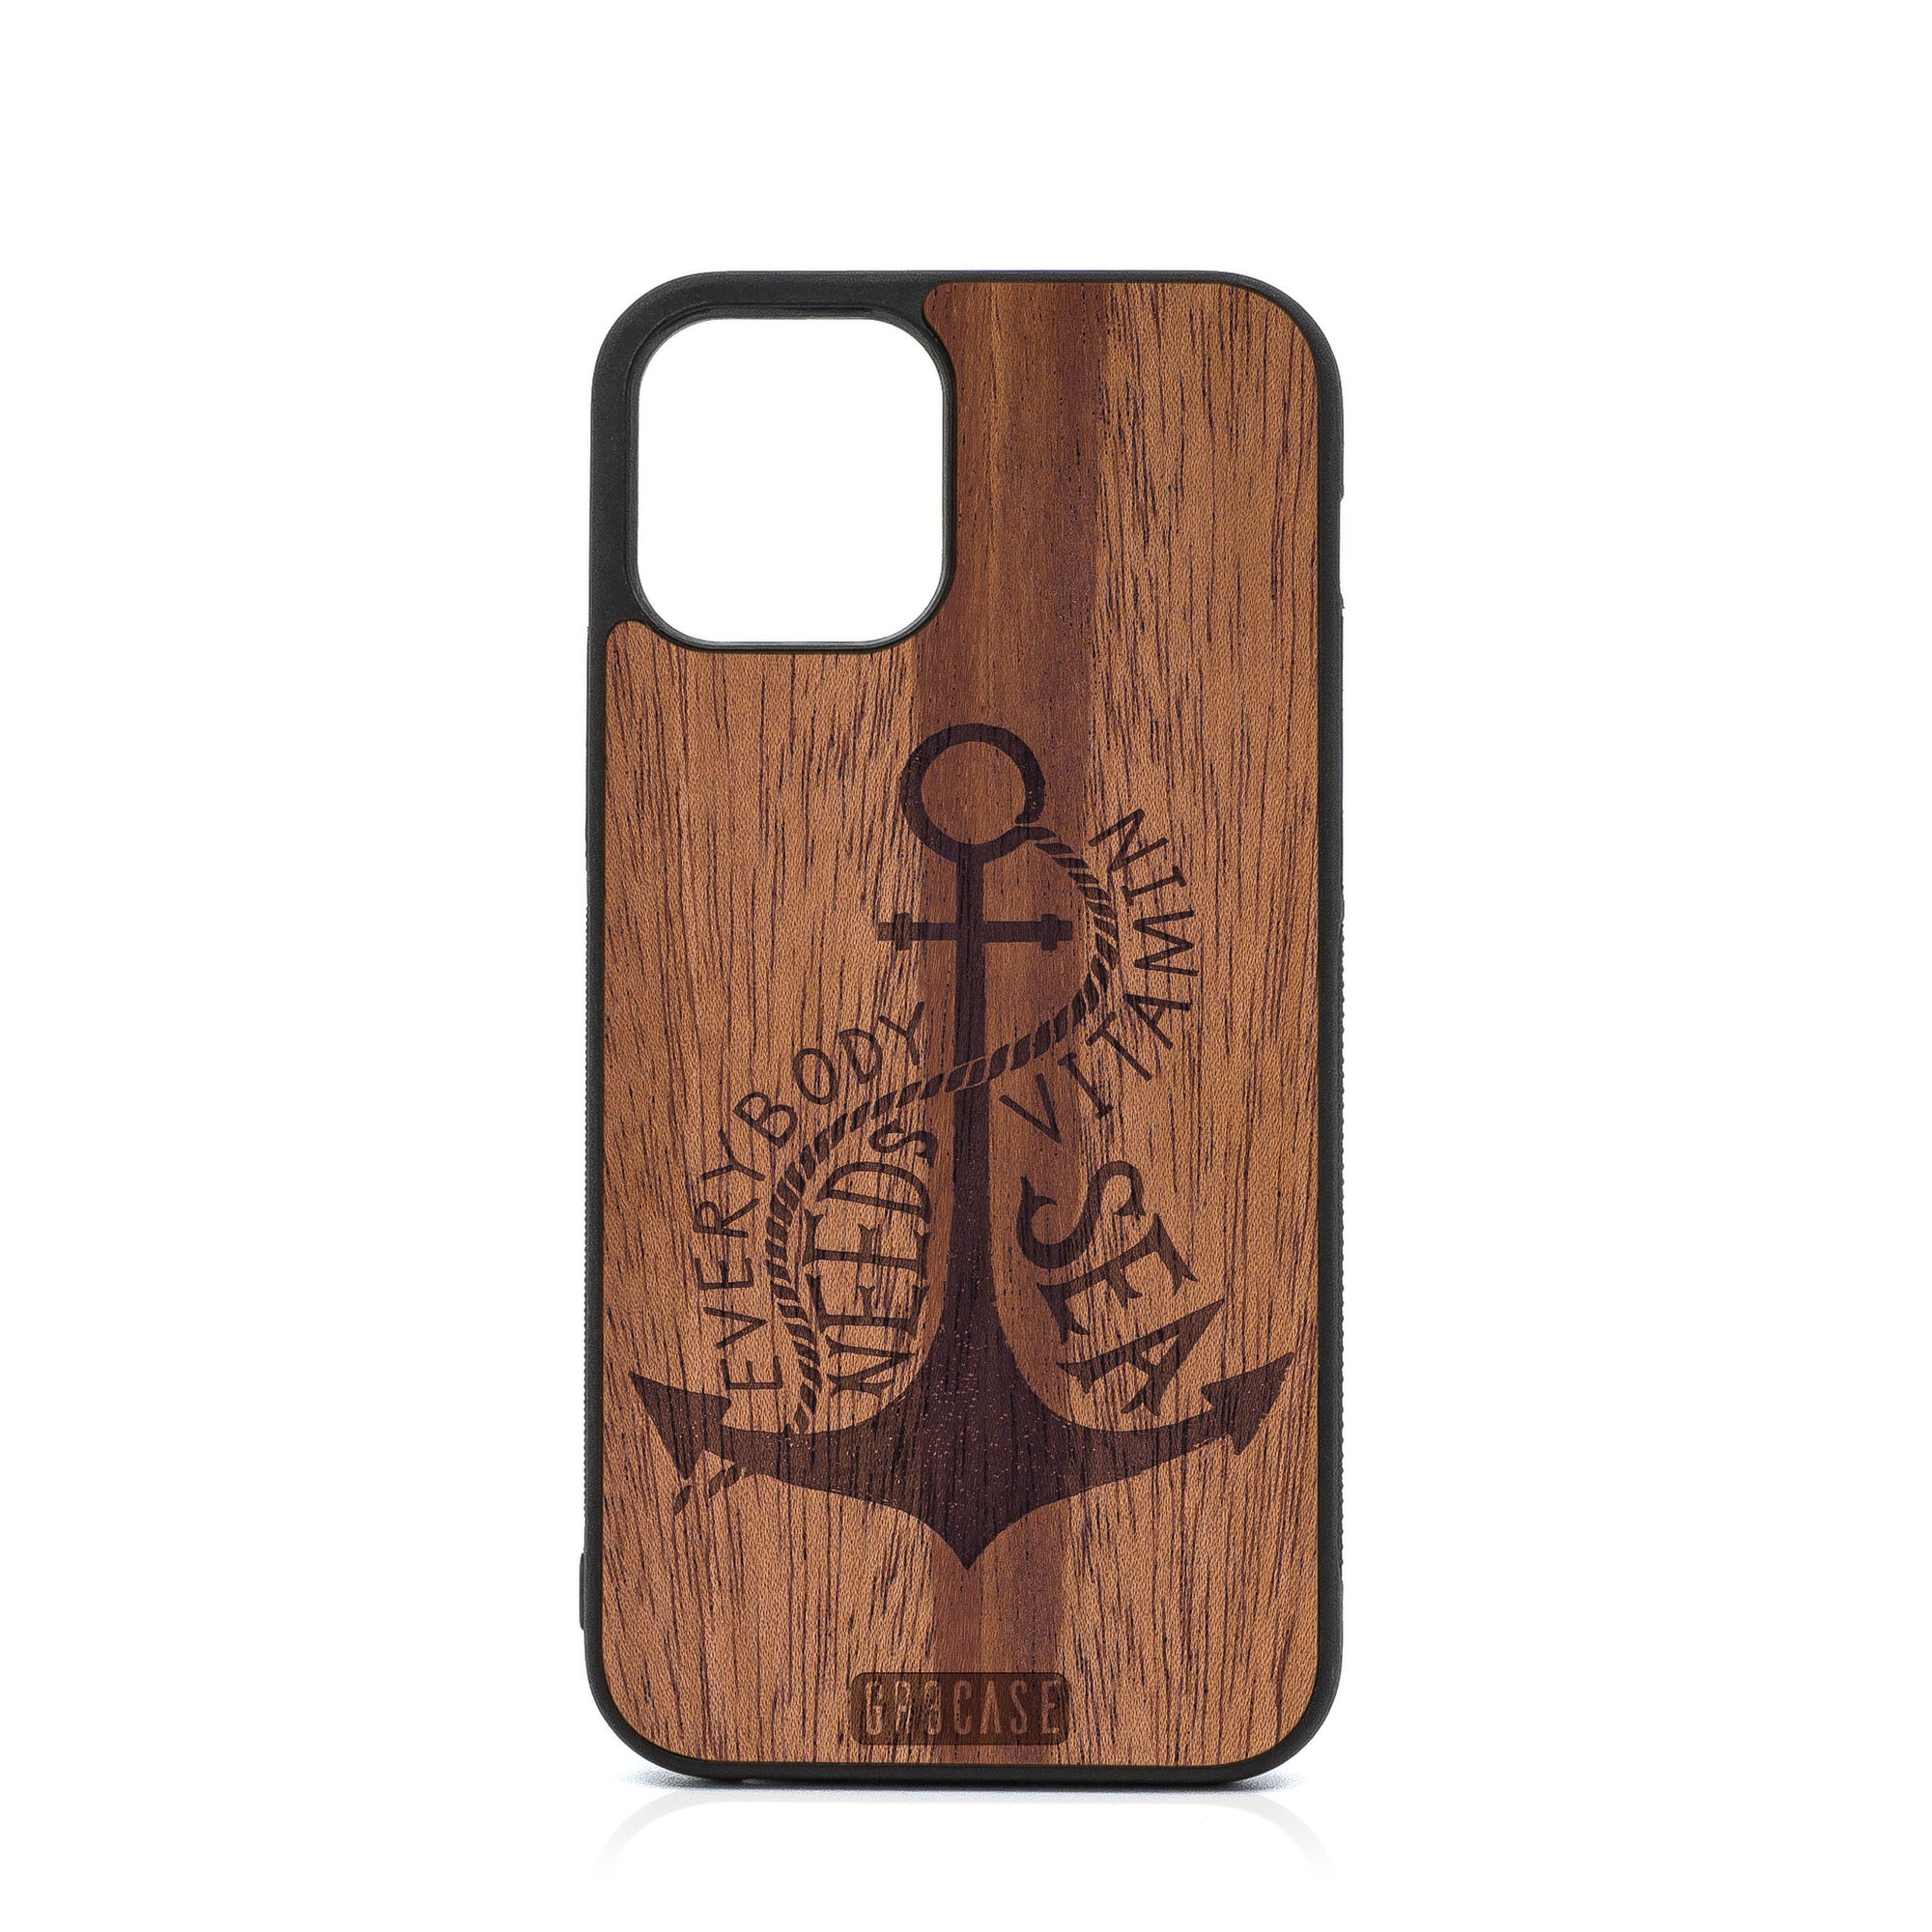 Everybody Needs Vitamin Sea (Anchor) Design Wood Case For iPhone 12 Pro